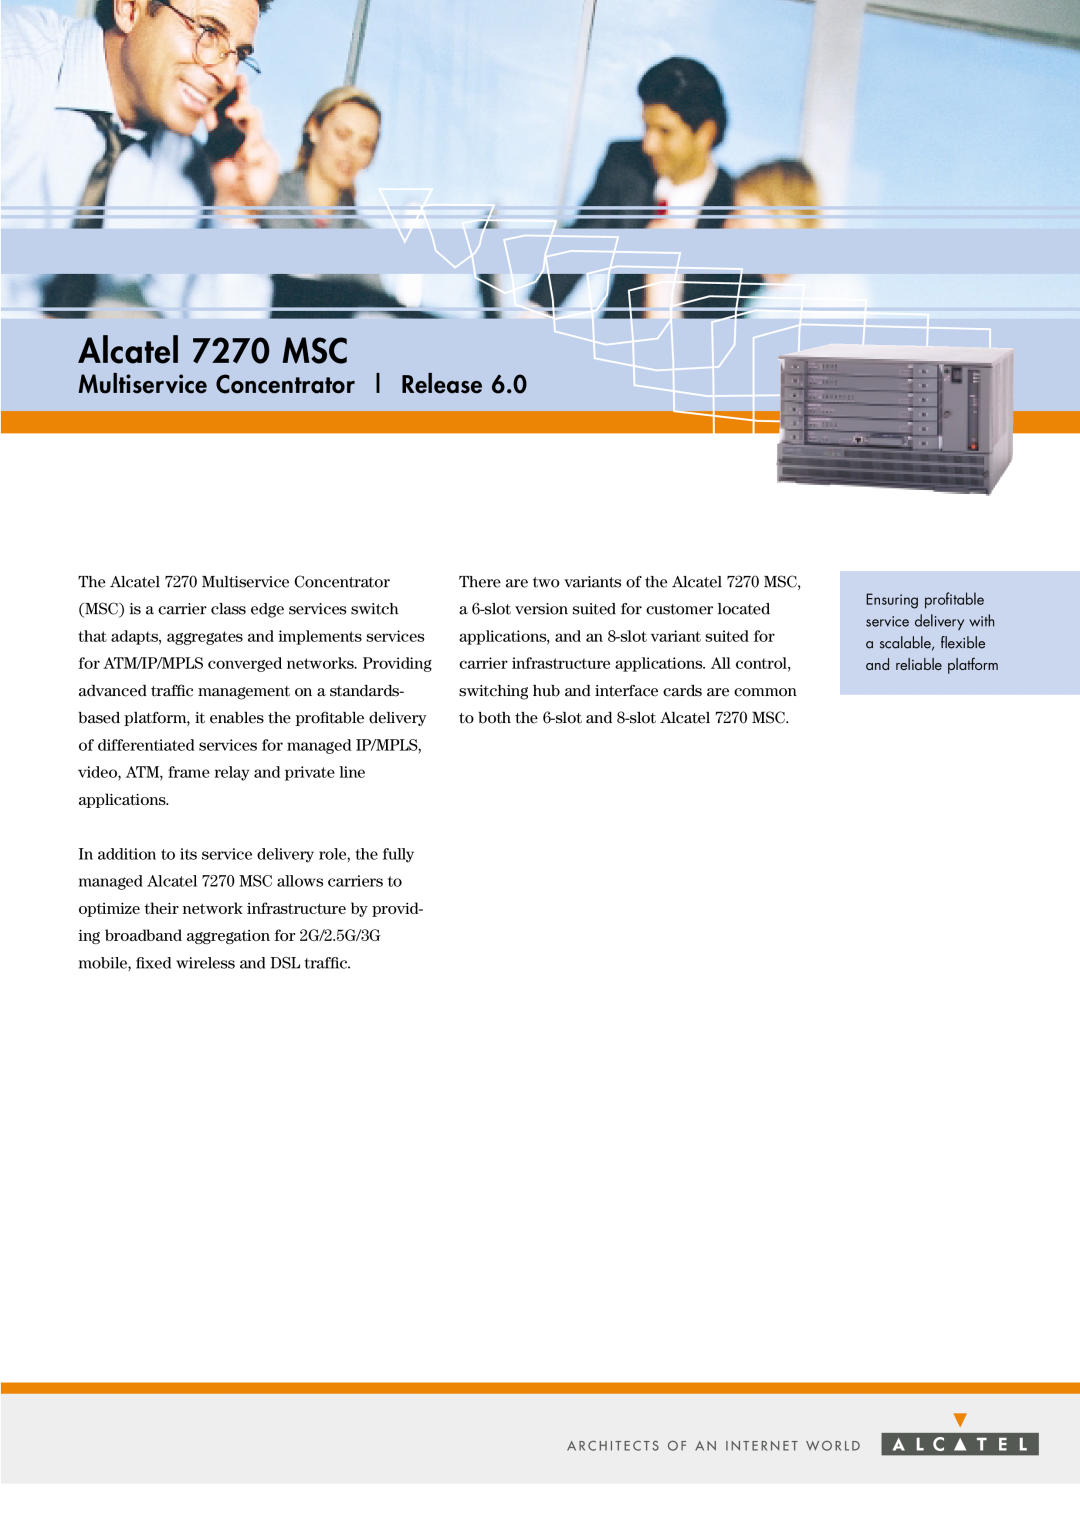 Alcatel Carrier Internetworking Solutions manual Multiservice Concentrator Release, Alcatel 7270 MSC 